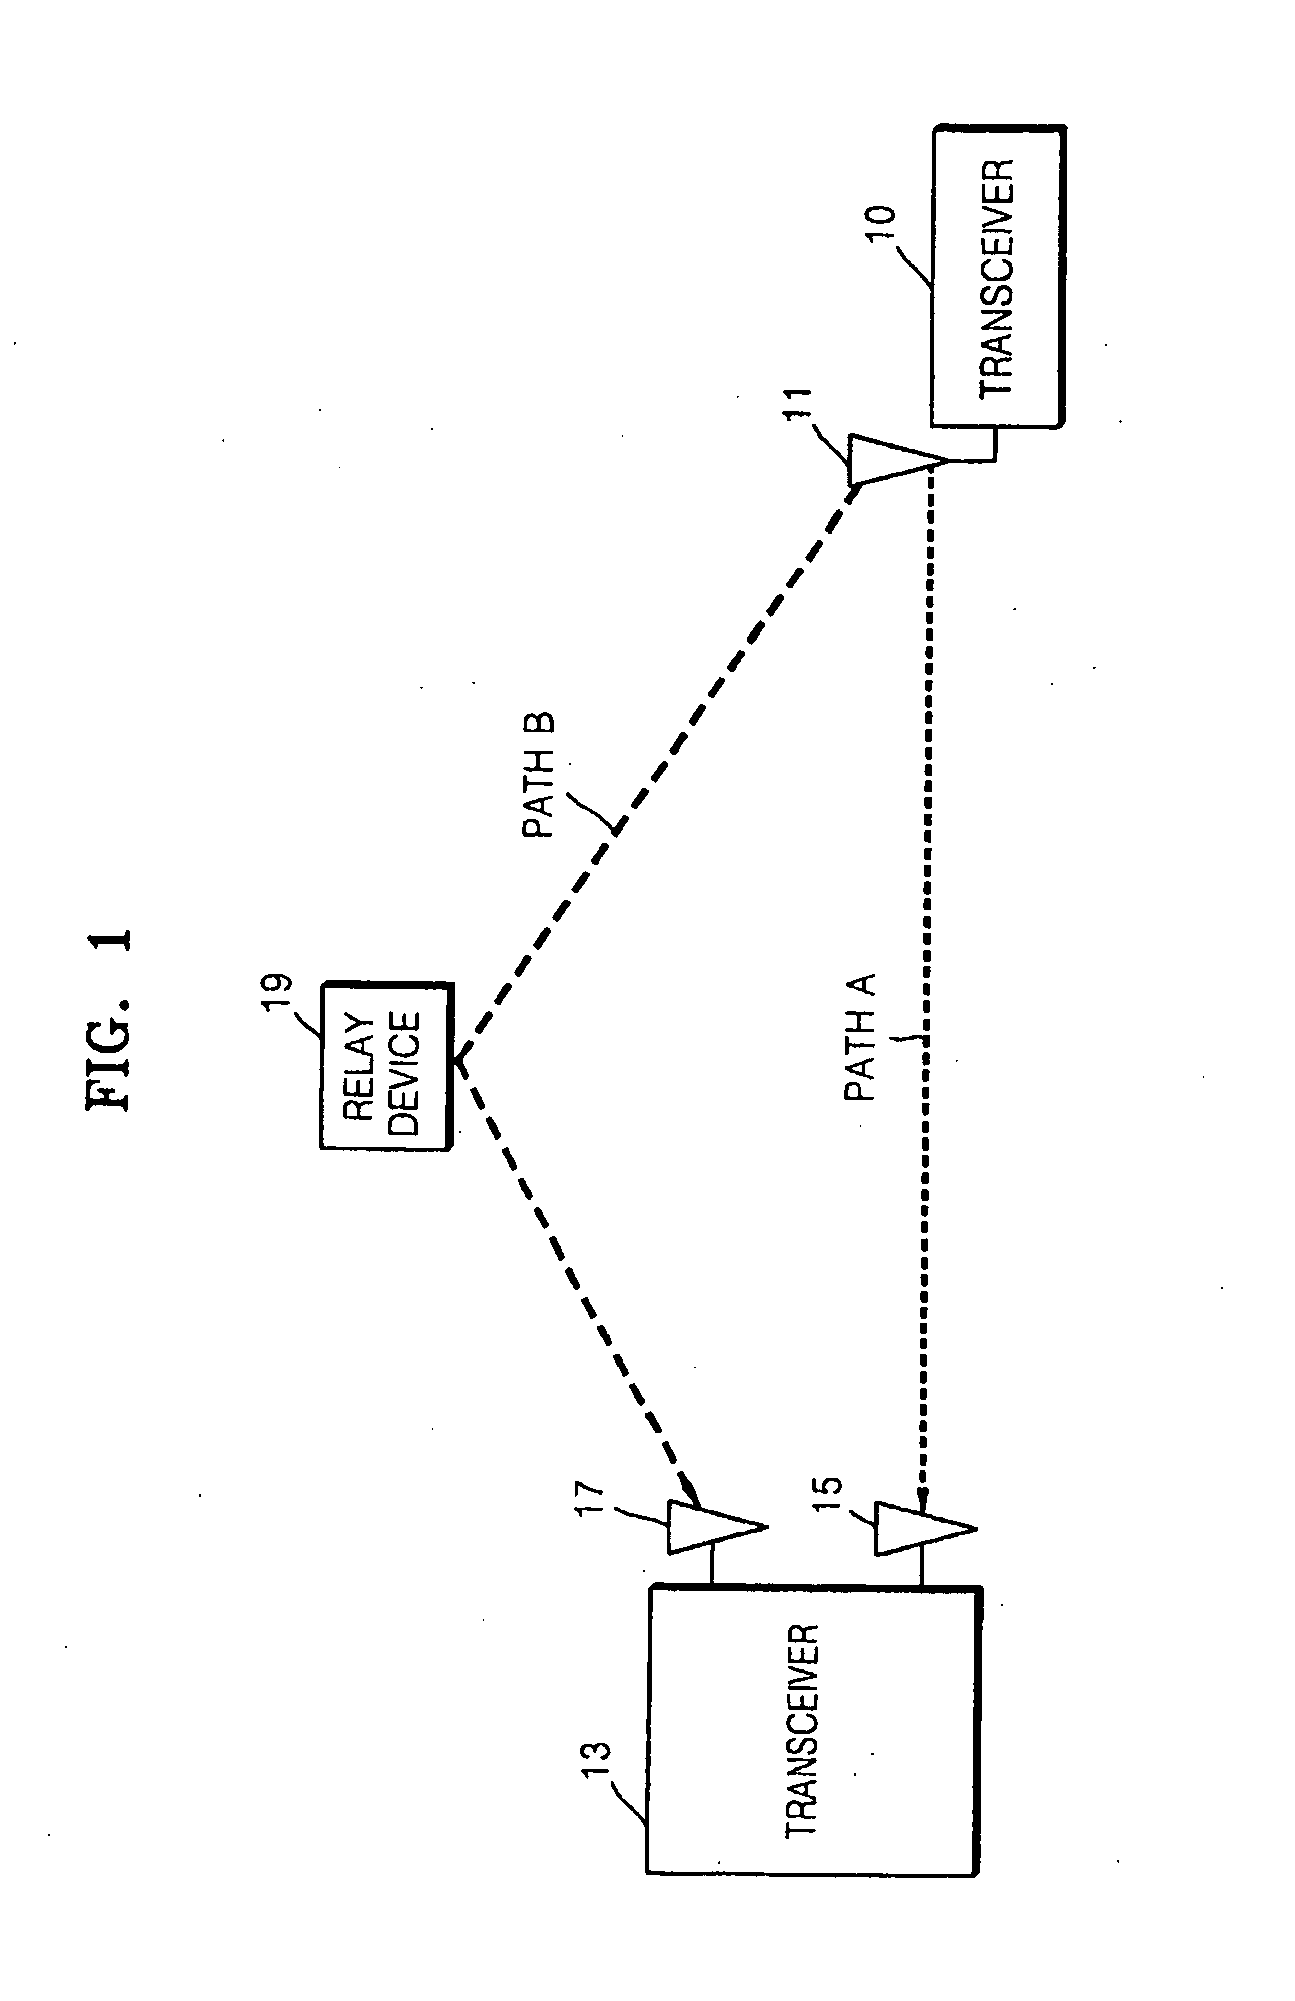 Apparatus and method of data transmission and reception using multi-path